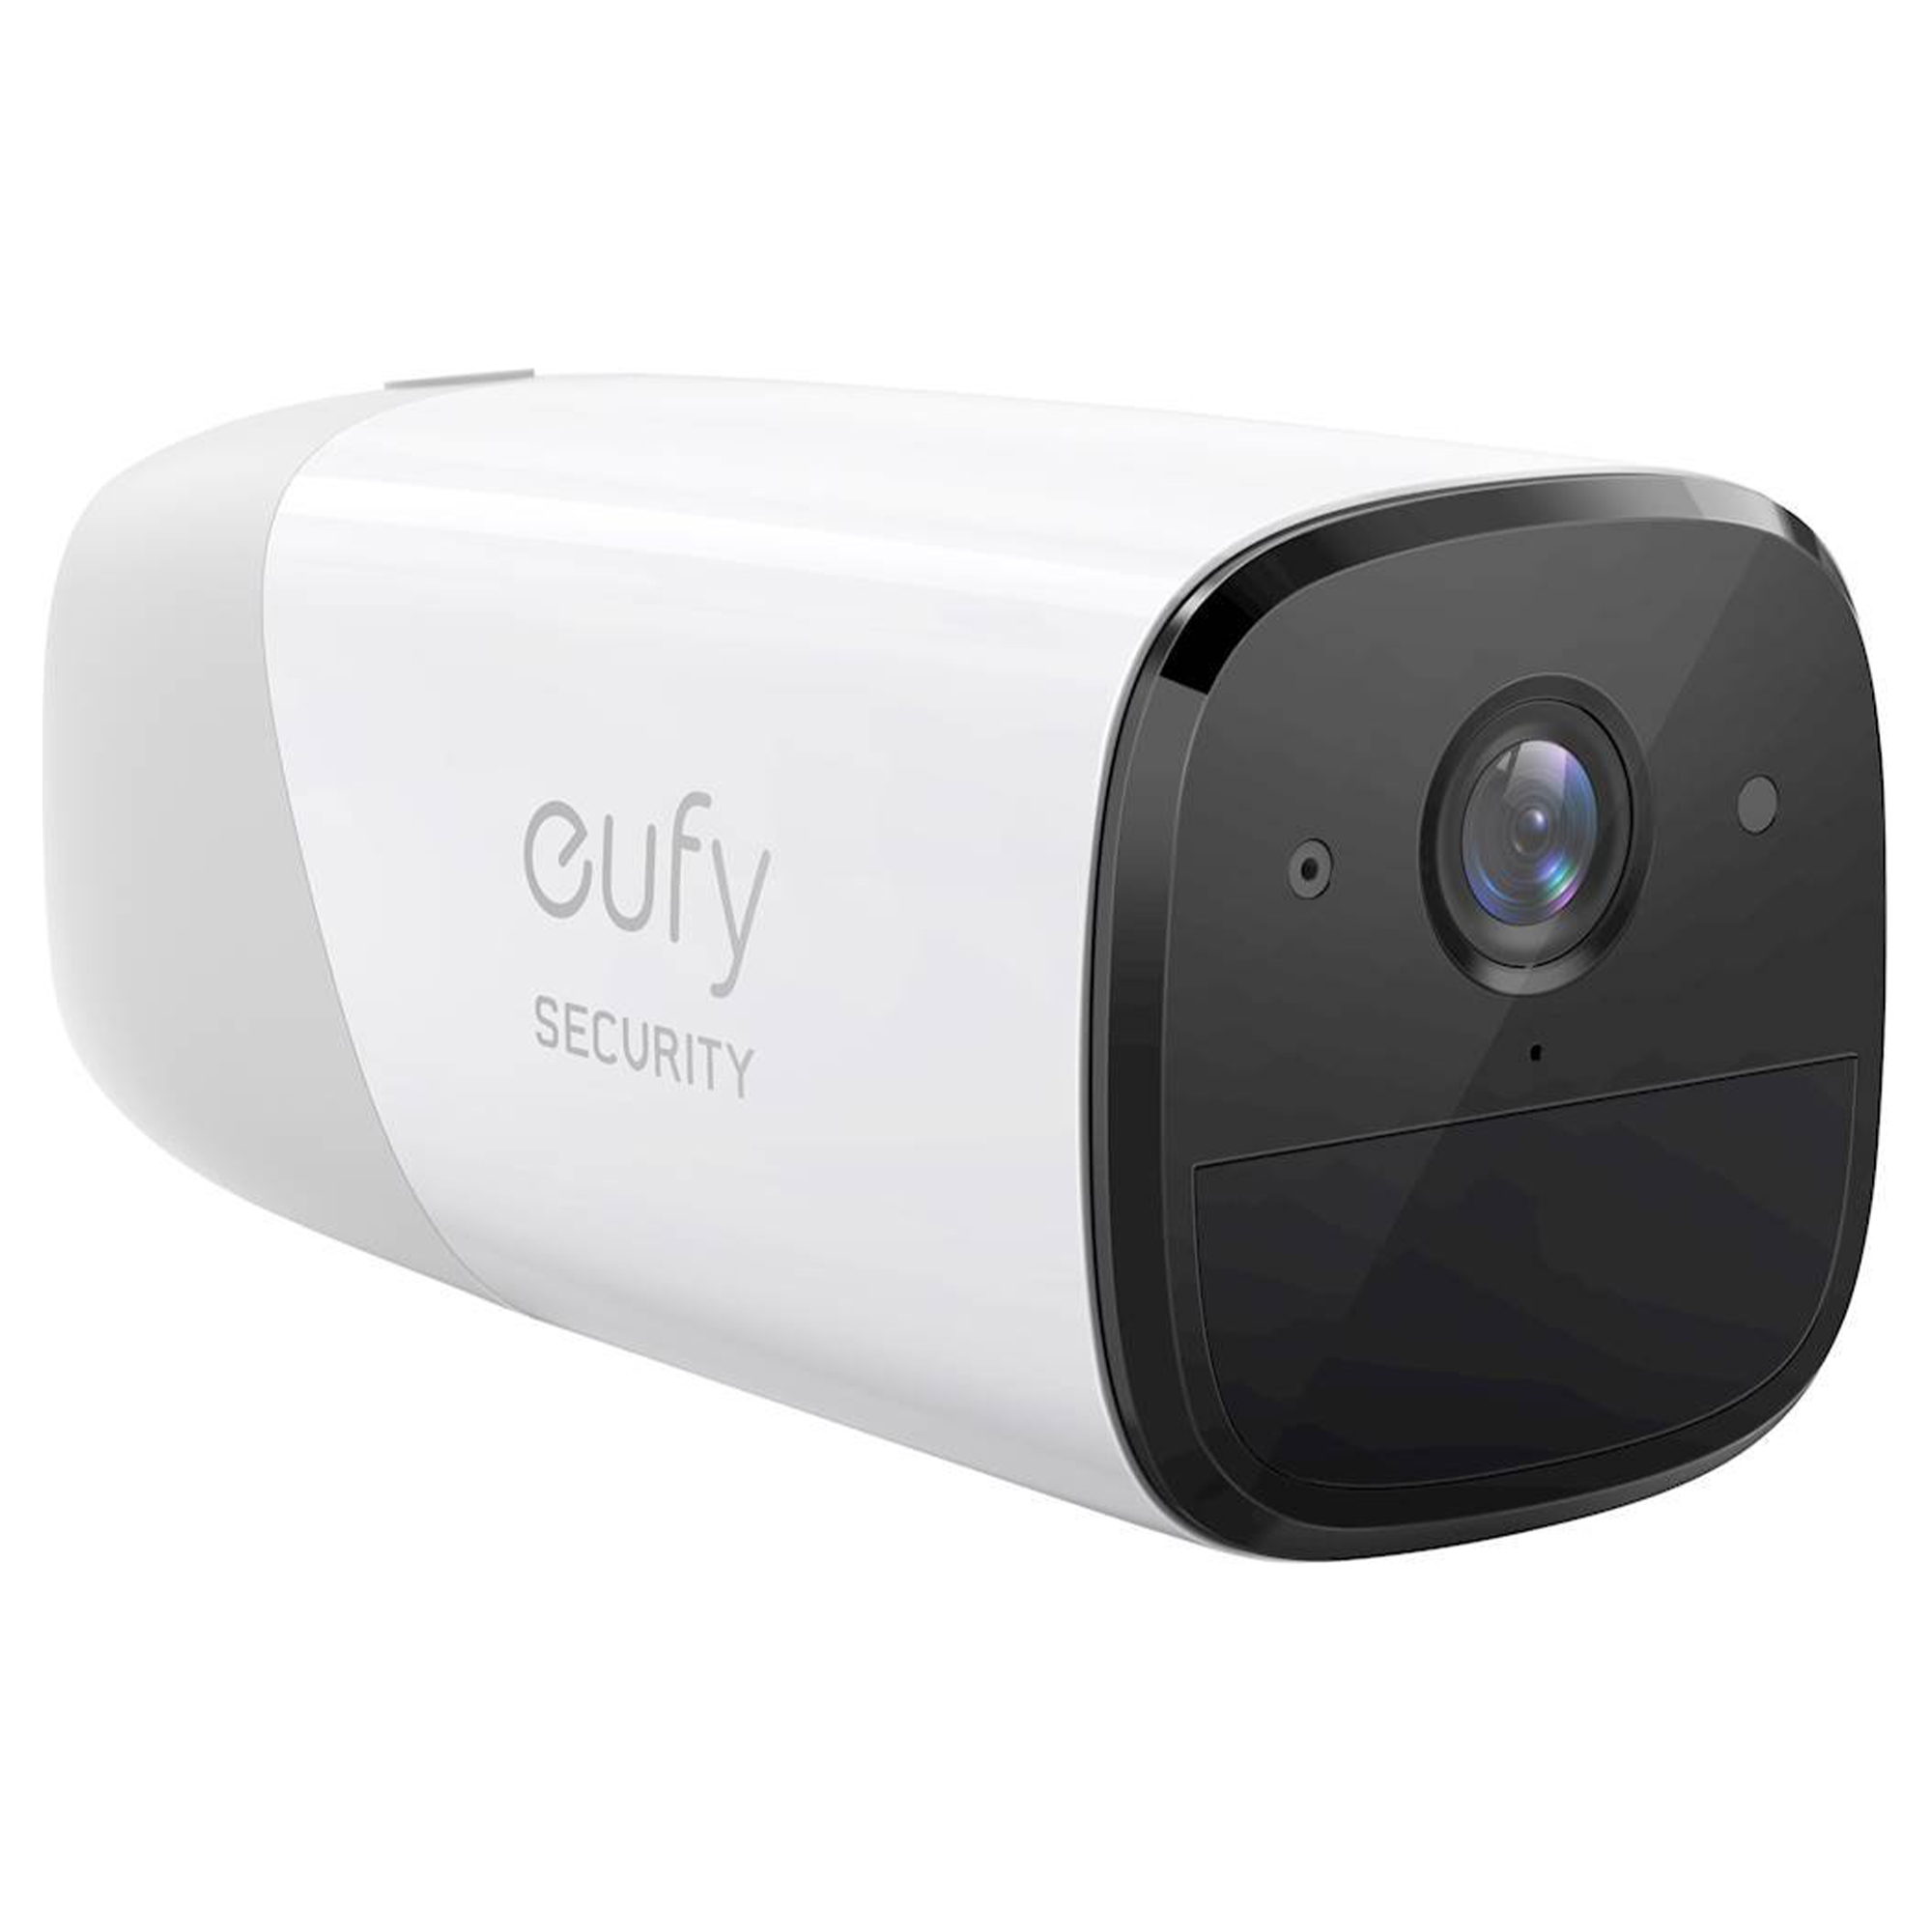 Lowe’s Deal of the Day -  eufyCam 2 1080p add-on cam $89.99